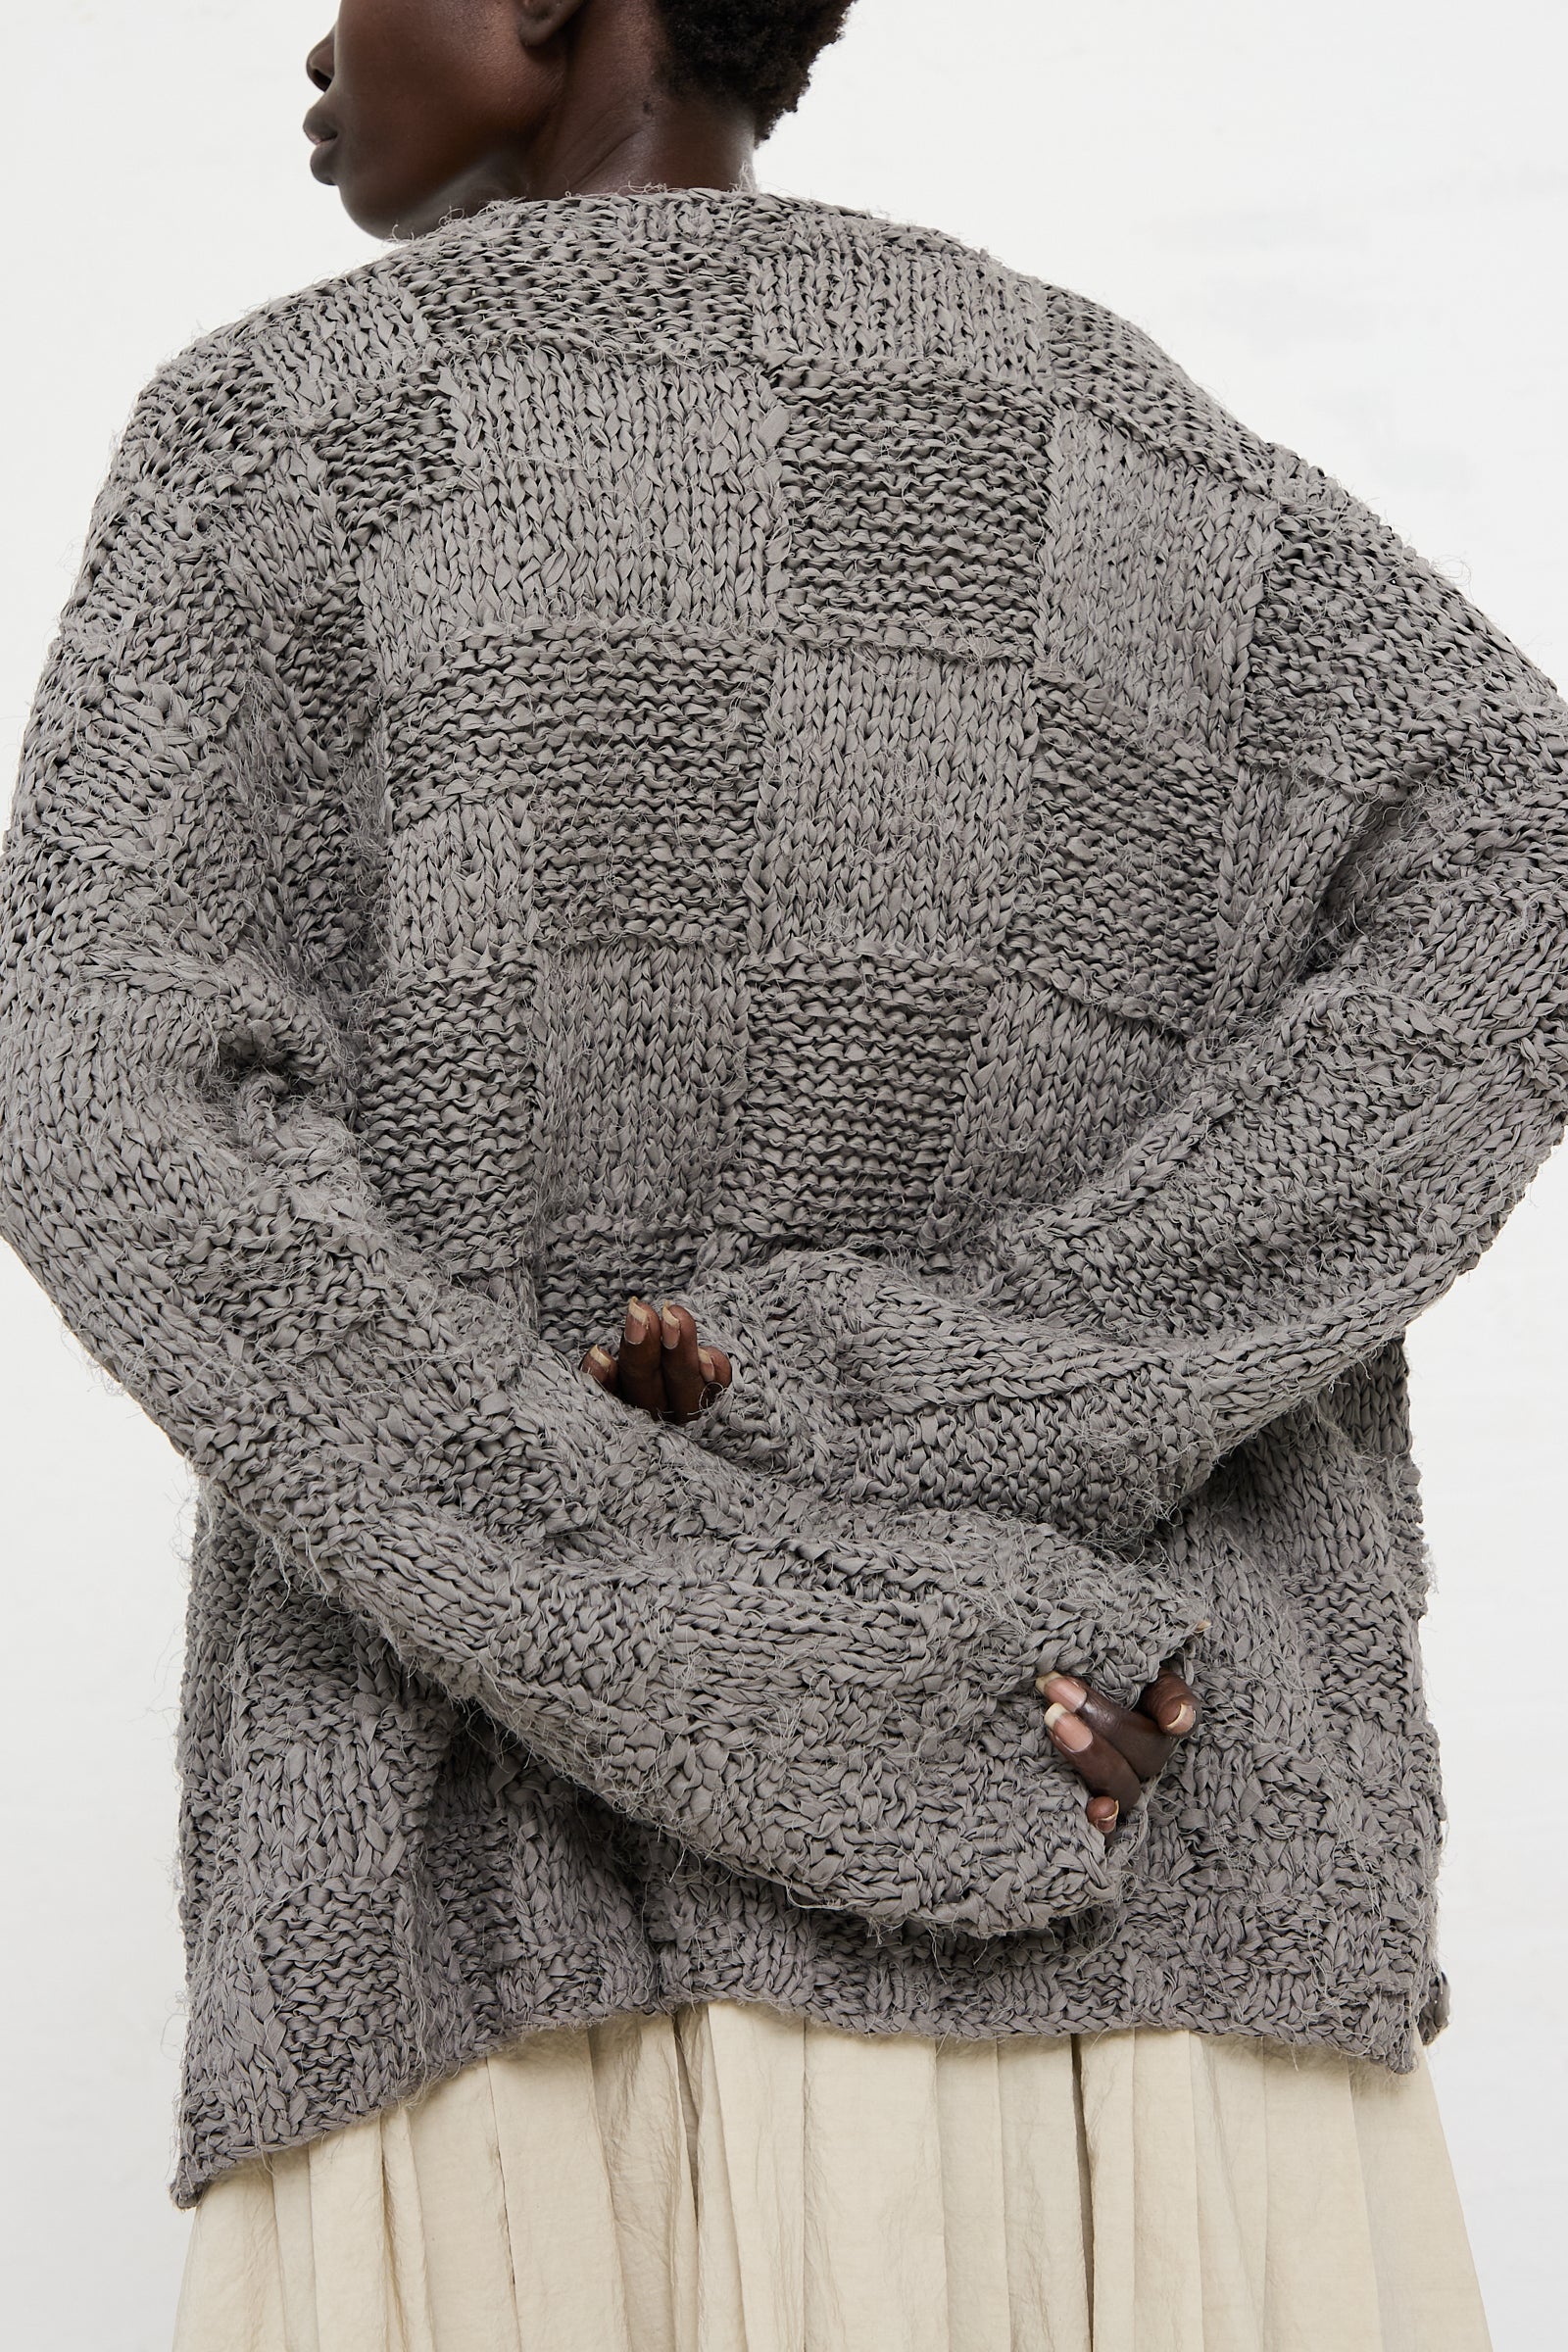 A person wearing a Lauren Manoogian Handknit Pullover Sweater in Gris stands with hands clasped behind their back.